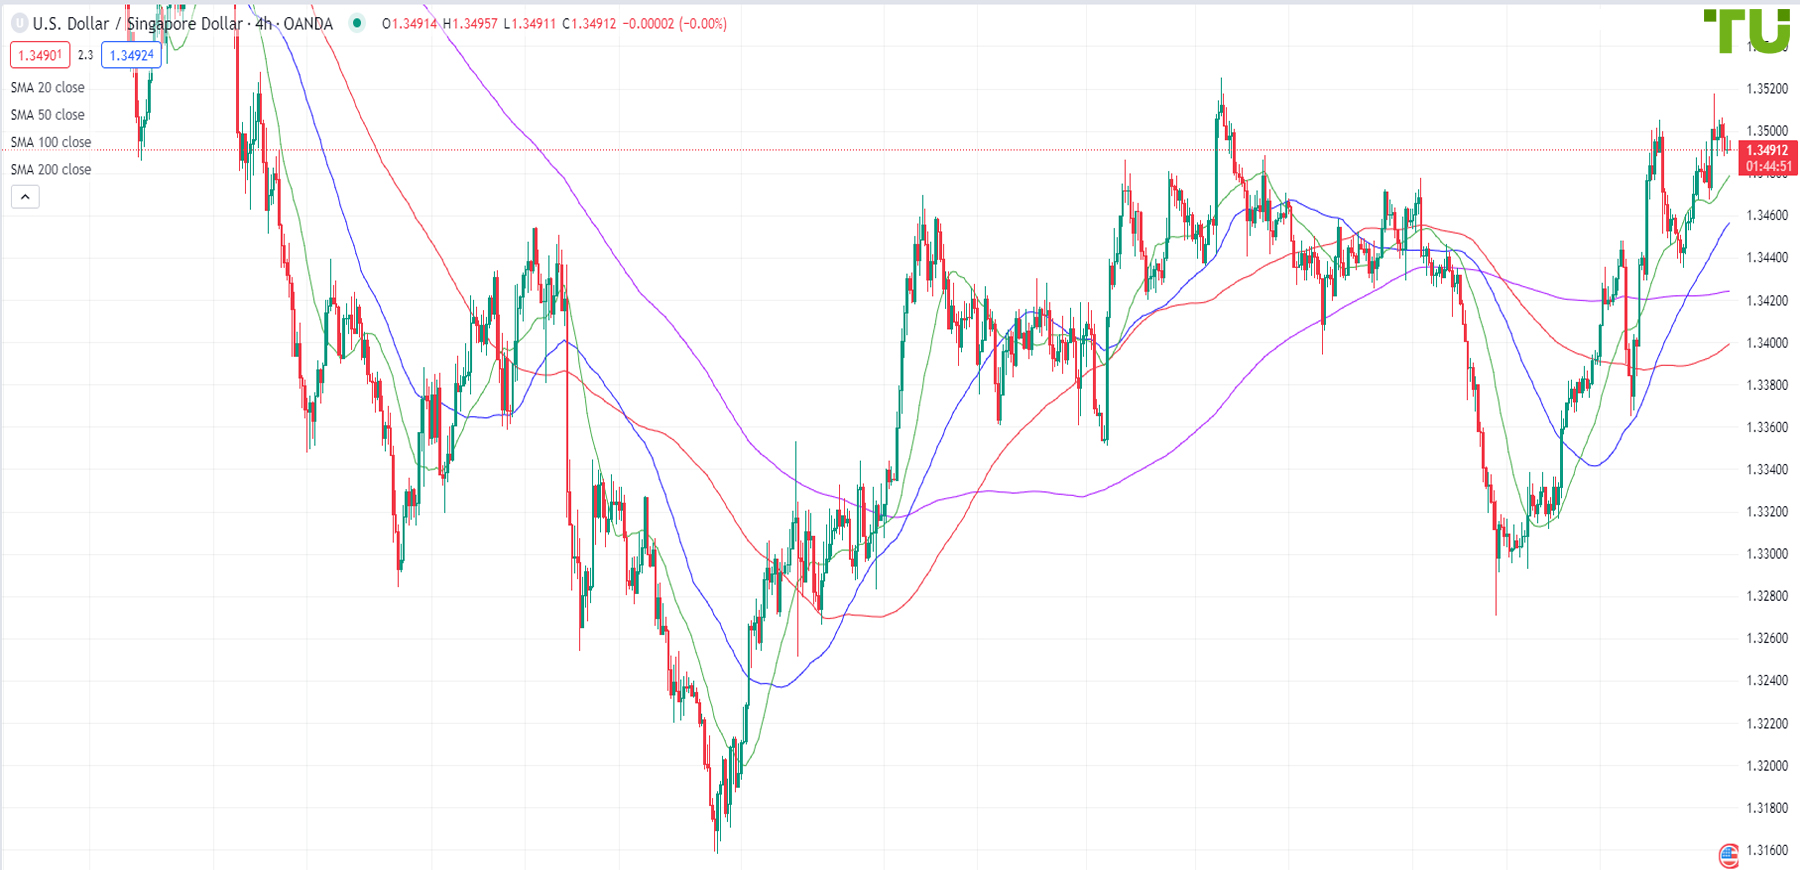 USD/SGD retreats from resistance at 1.3517